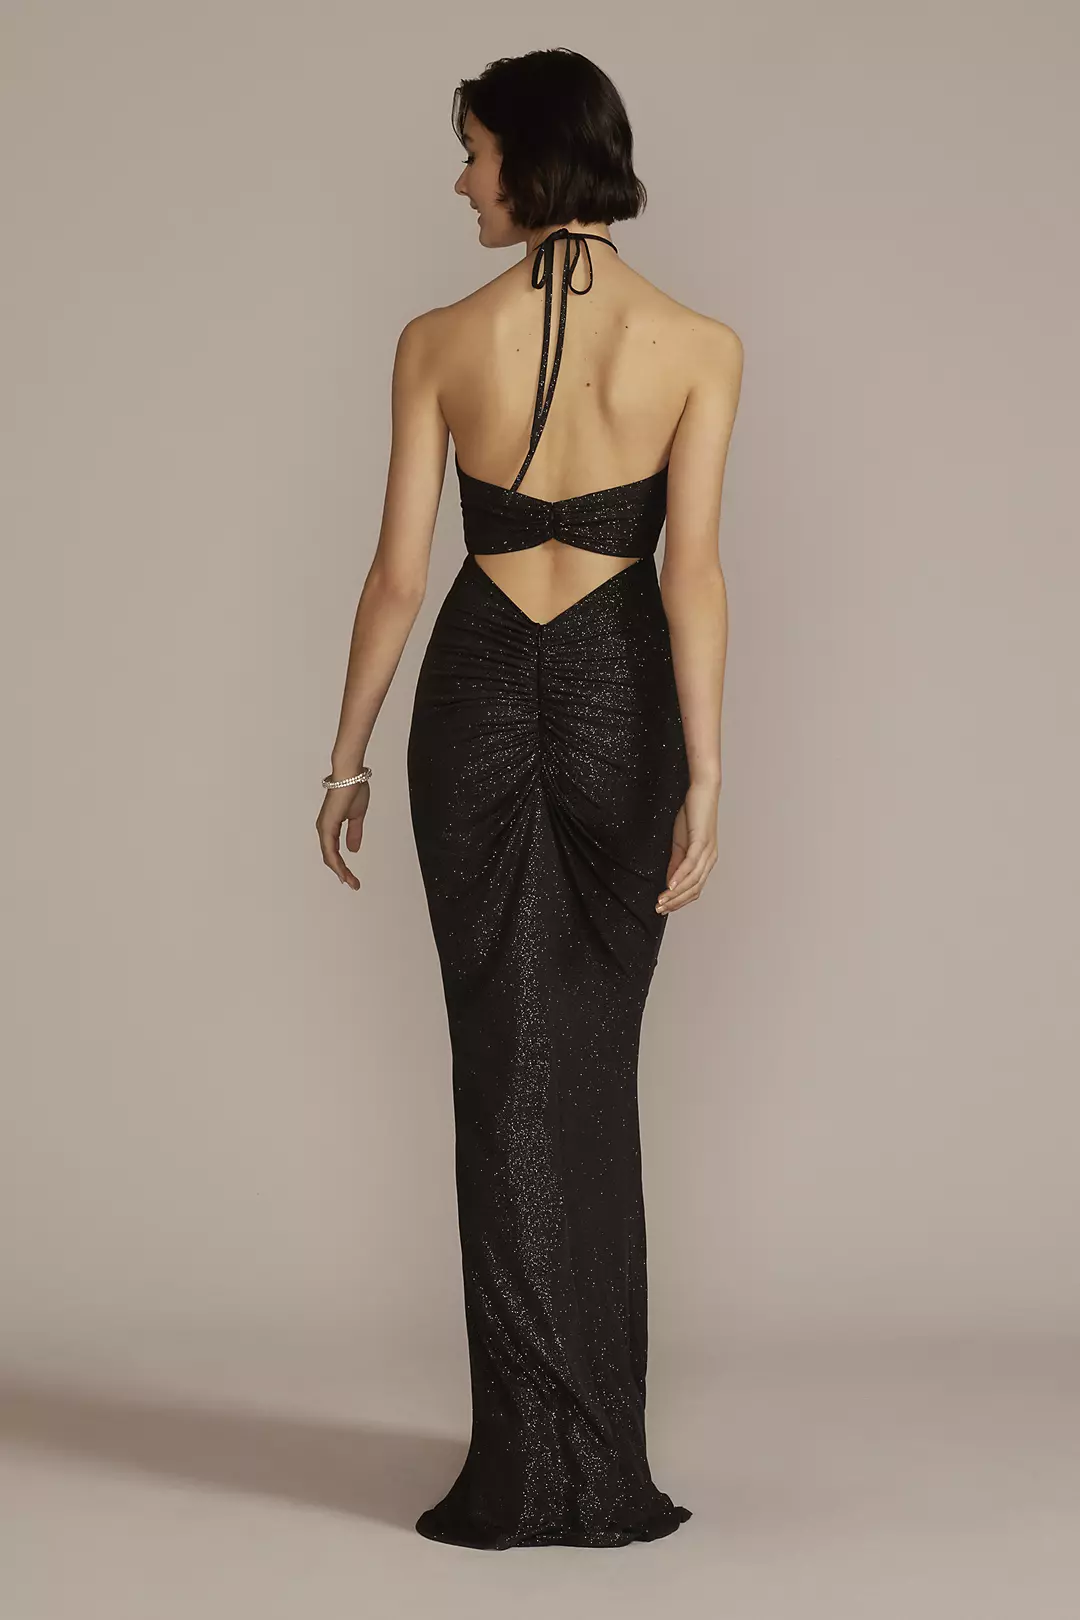 Cutout Glitter Halter Dress with Ruched Skirt Image 2